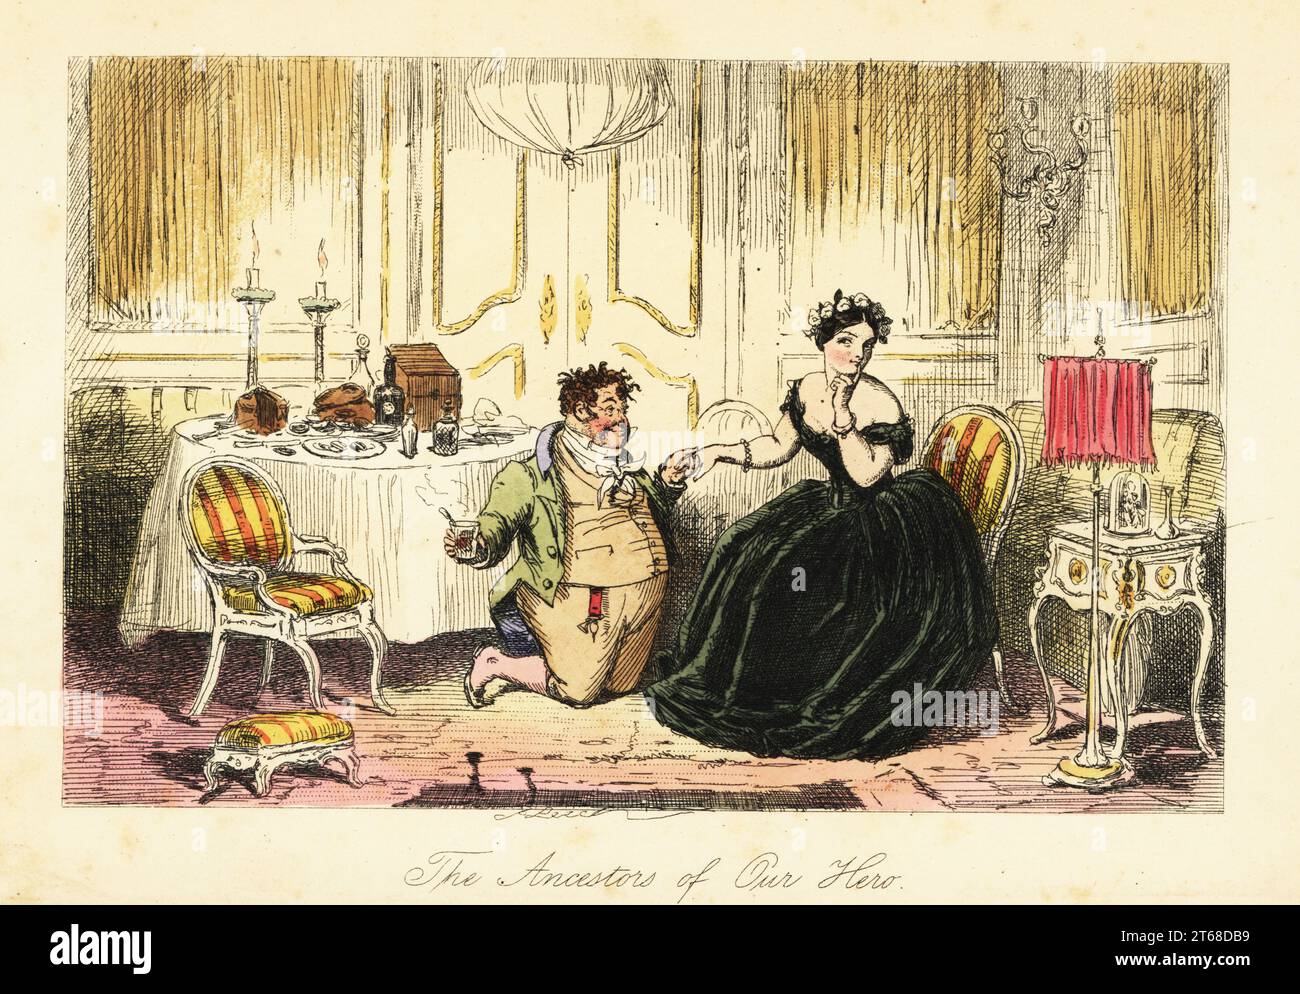 English gentleman courting a young lady in a restaurant in an inn, 19th century. Woman in black crinoline with garland of flowers in her hair. Interior of an inn on a stage coach road. Billy Pringle Sr. helping Miss Willing to find her ring dropped under the table. The ancestors of our hero. Handcoloured steel engraving after an illustration by John Leech from Robert Smith Surtees Ask Mamma, or the Richest Commoner in England, Bradbury and Evans., London, 1858. Stock Photo